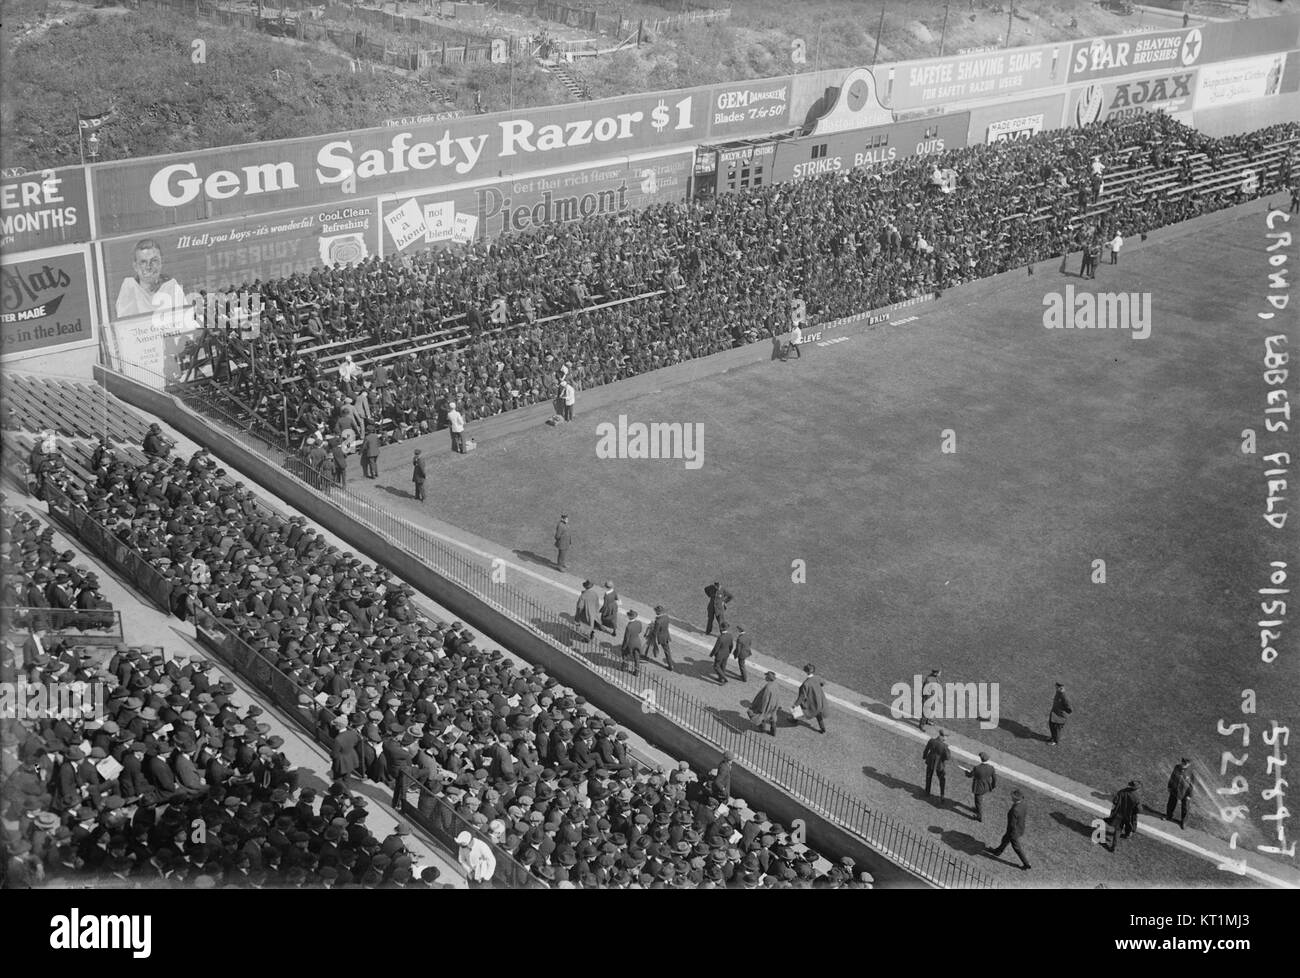 Crowd at Ebbets Field Stock Photo